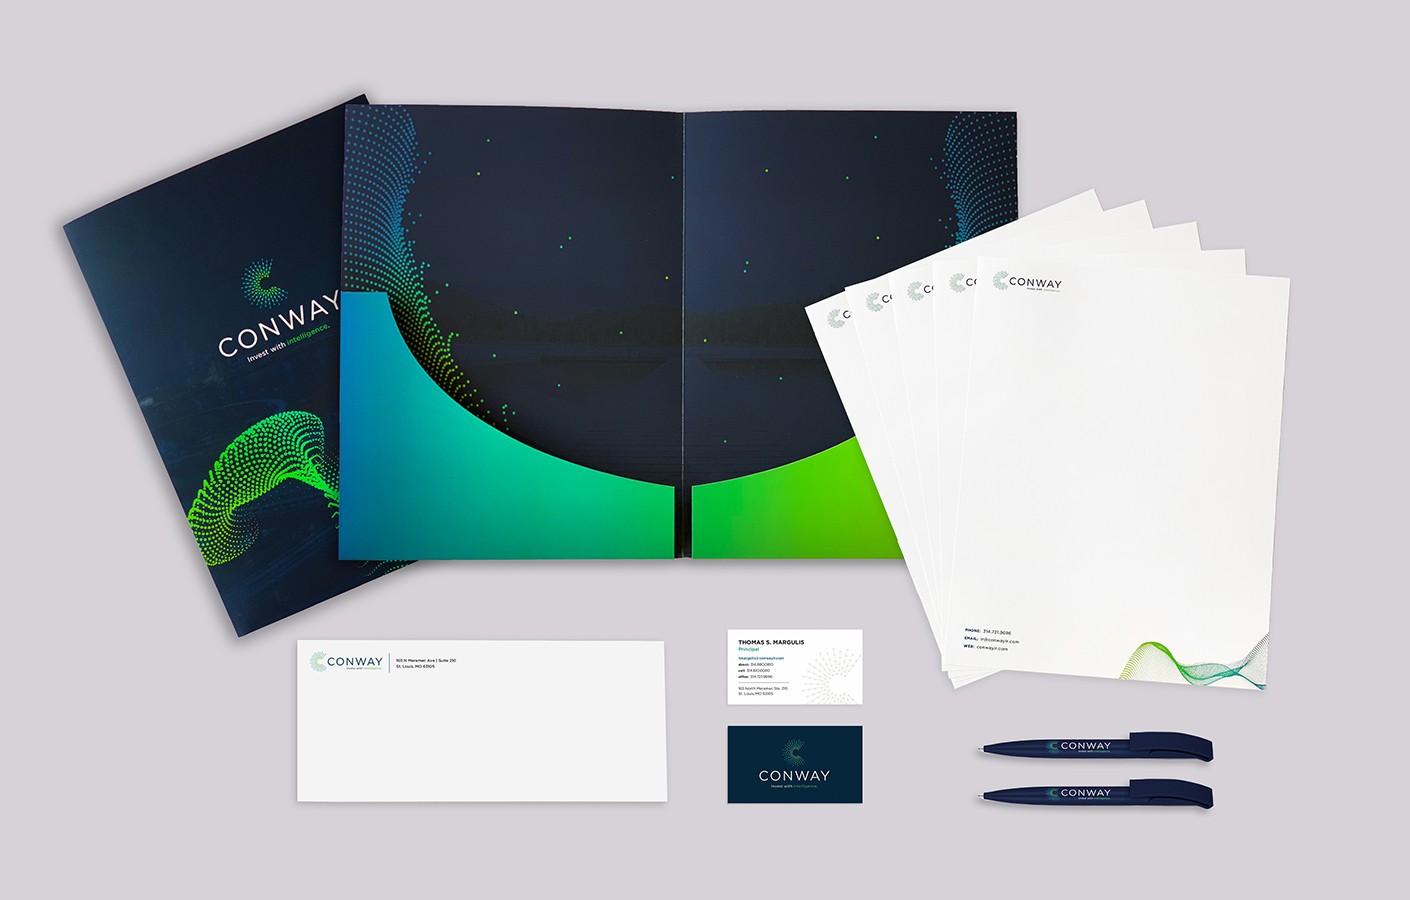 conway collateral system, documents, pens, business cards